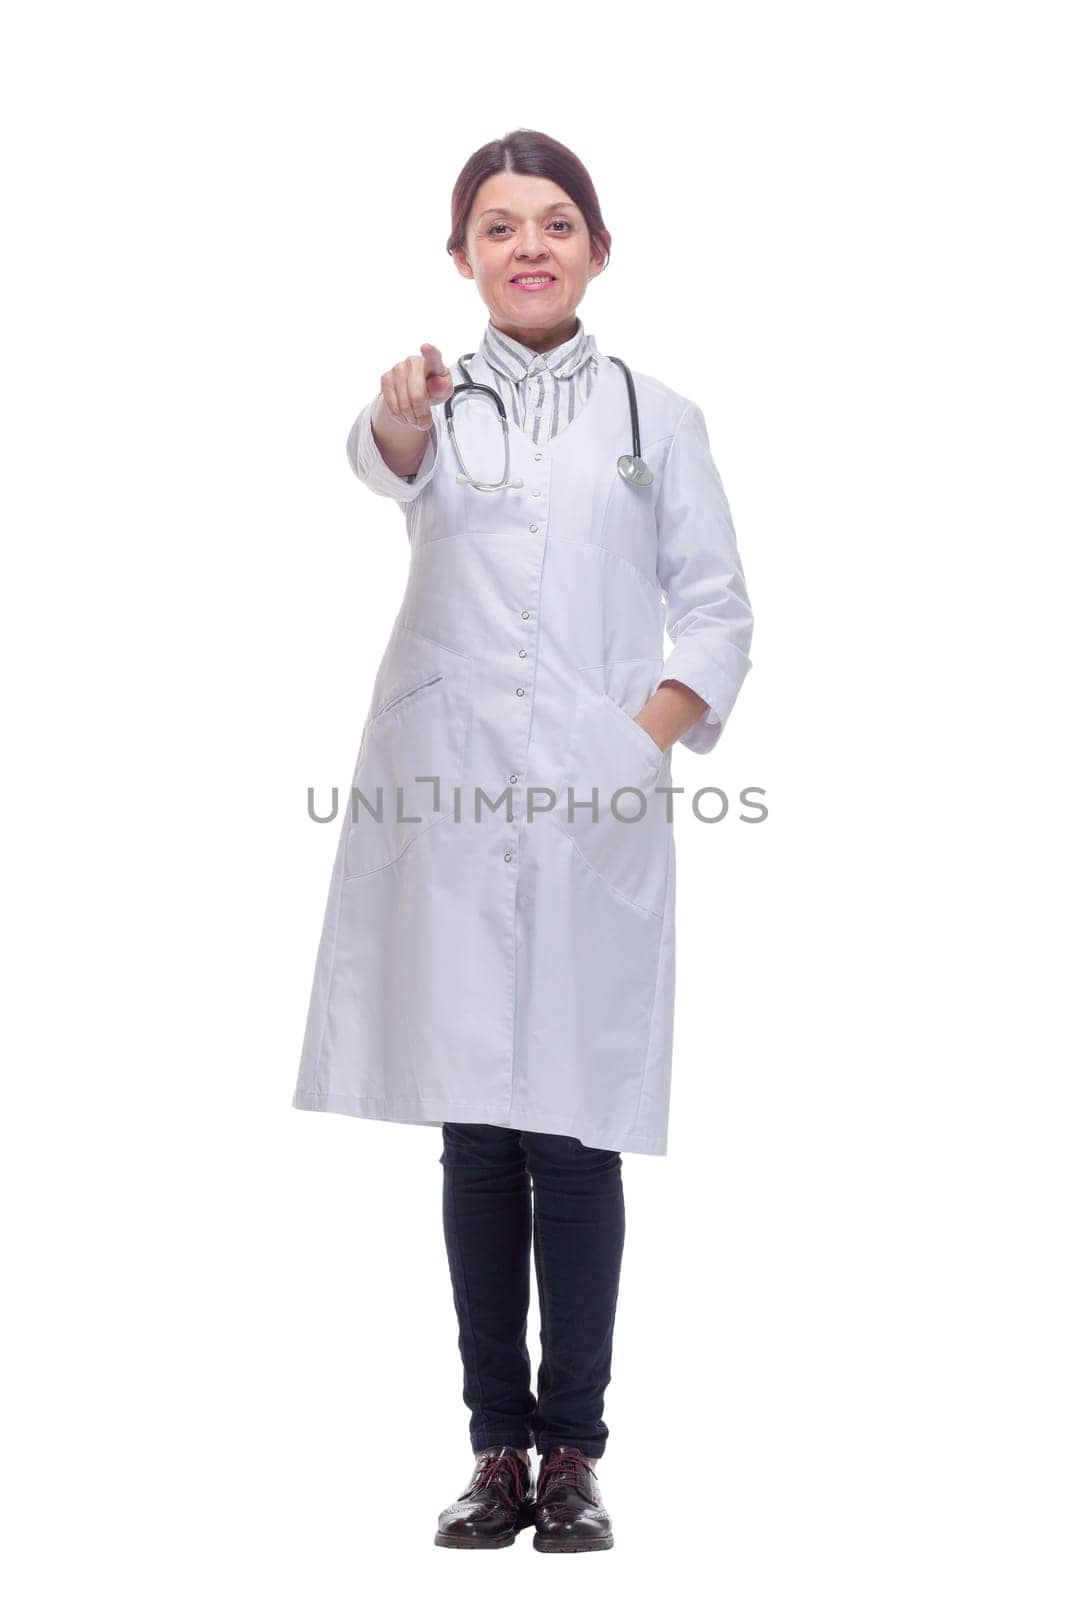 Portrait of friendly, smiling confident female doctor, healthcare professional with labcoat and stethoscope by asdf